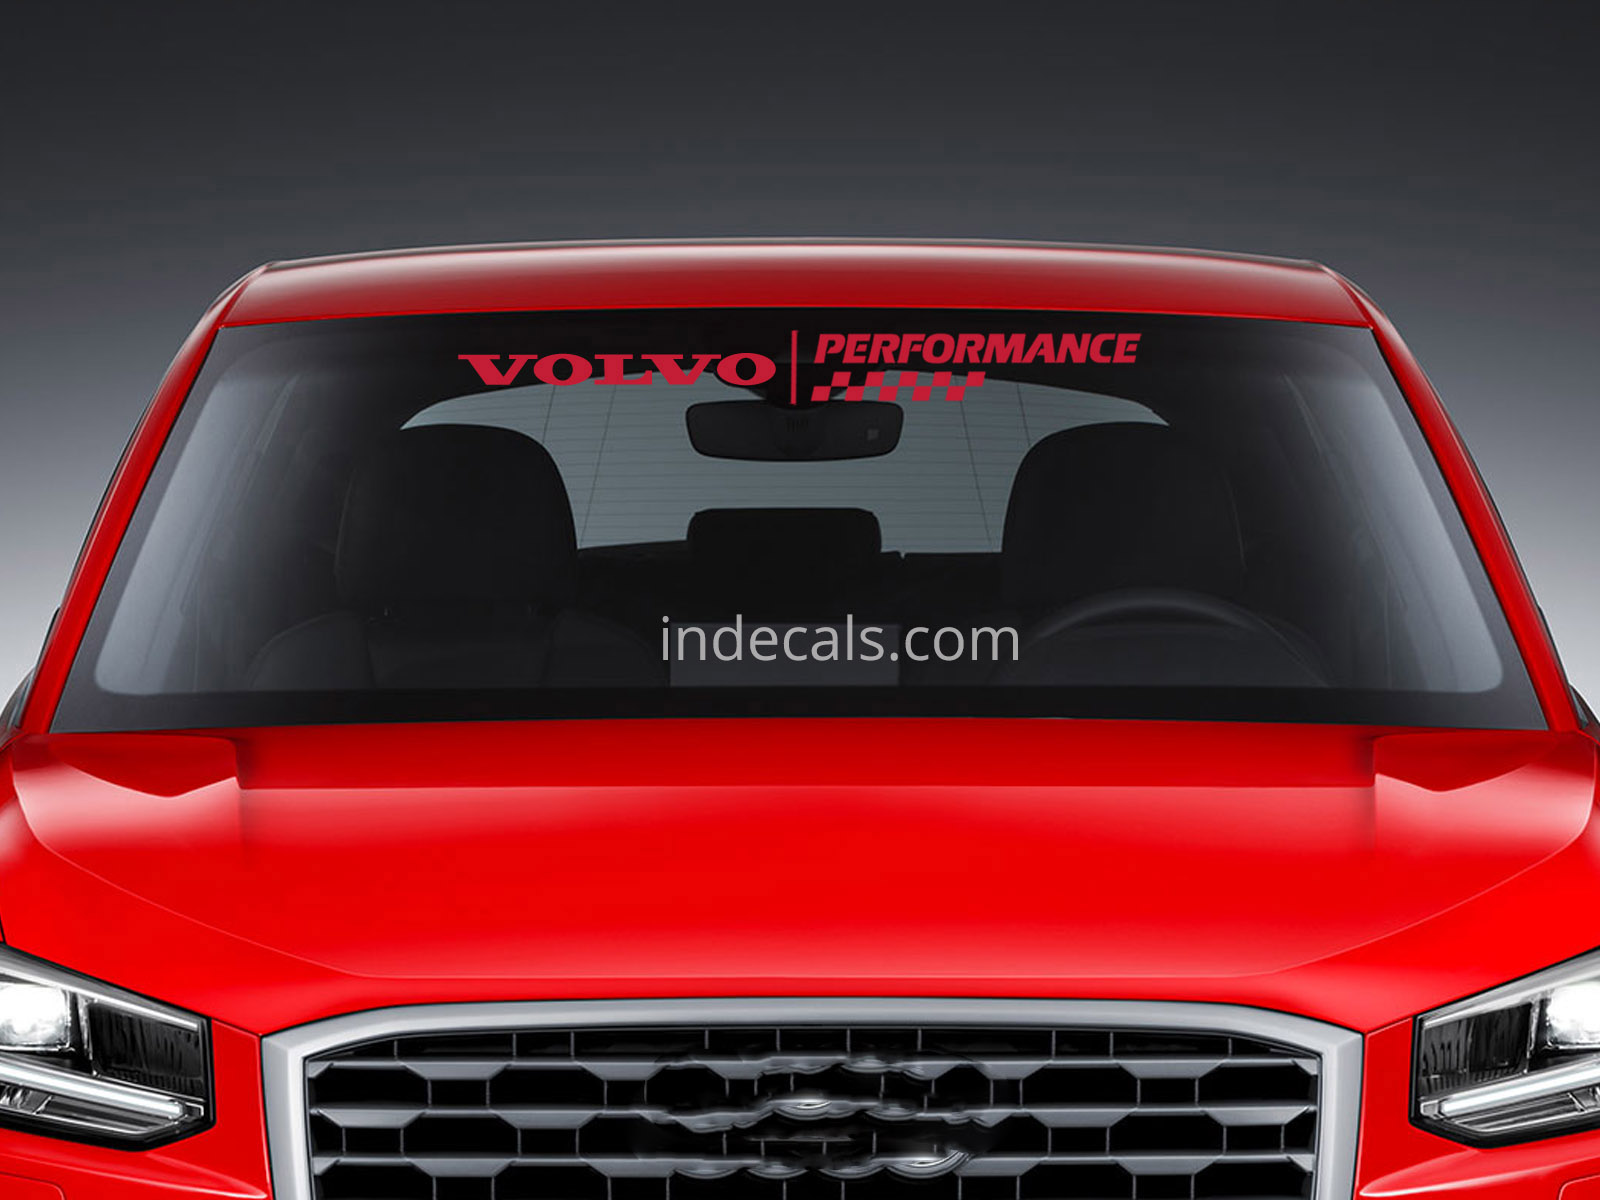 1 x Volvo Performance Sticker for Windshield or Back Window - Red